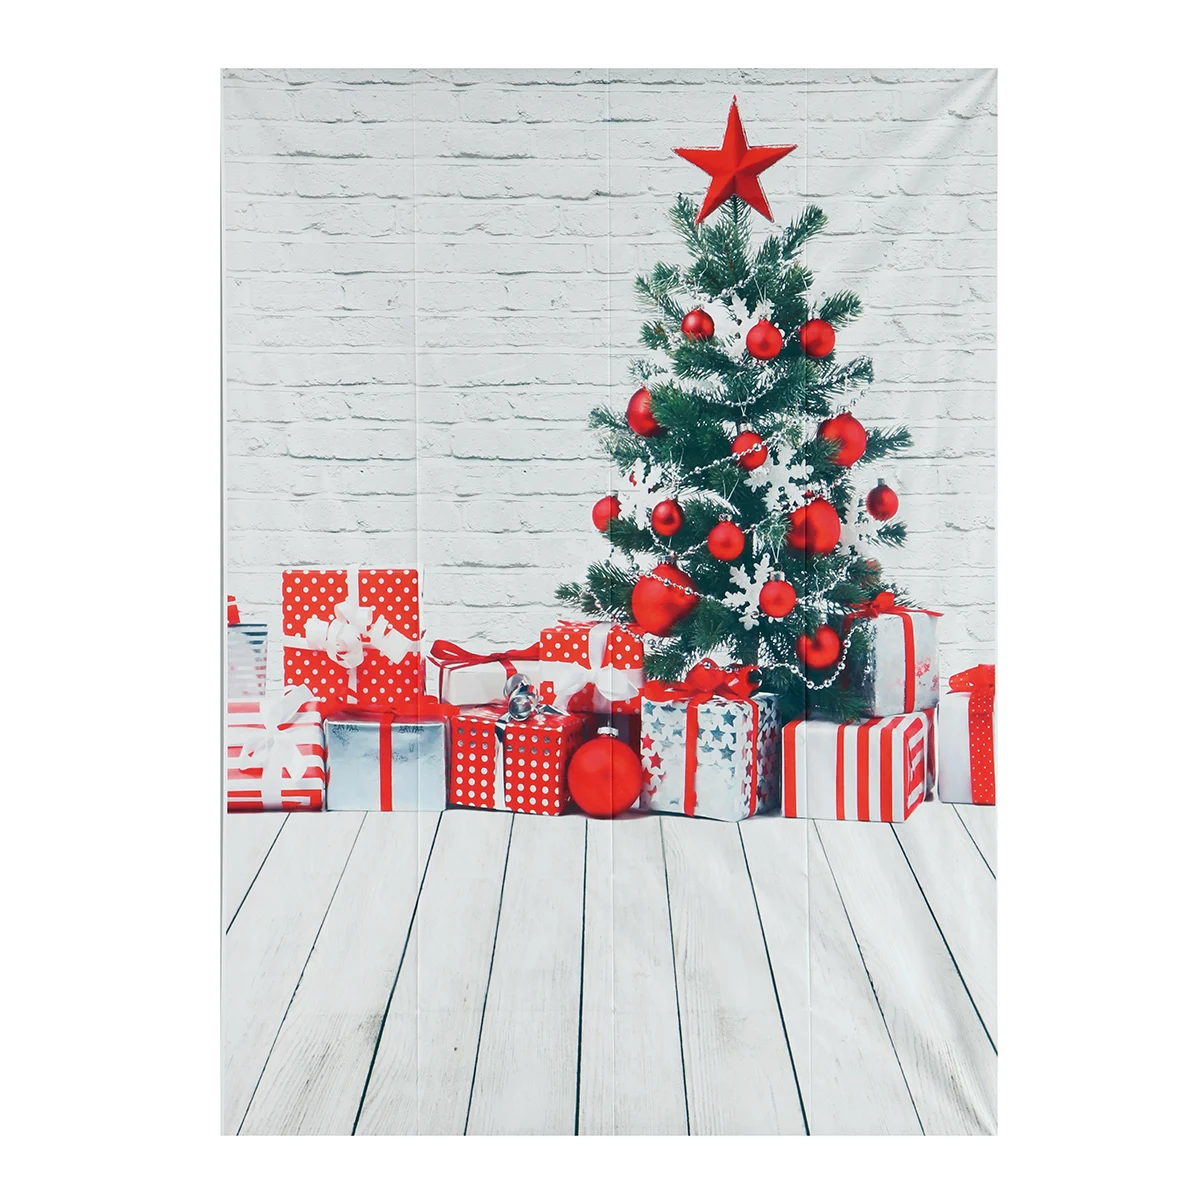 Christmas Party Photo Background Props Photography Studio Backdrop Decor 5x7FT